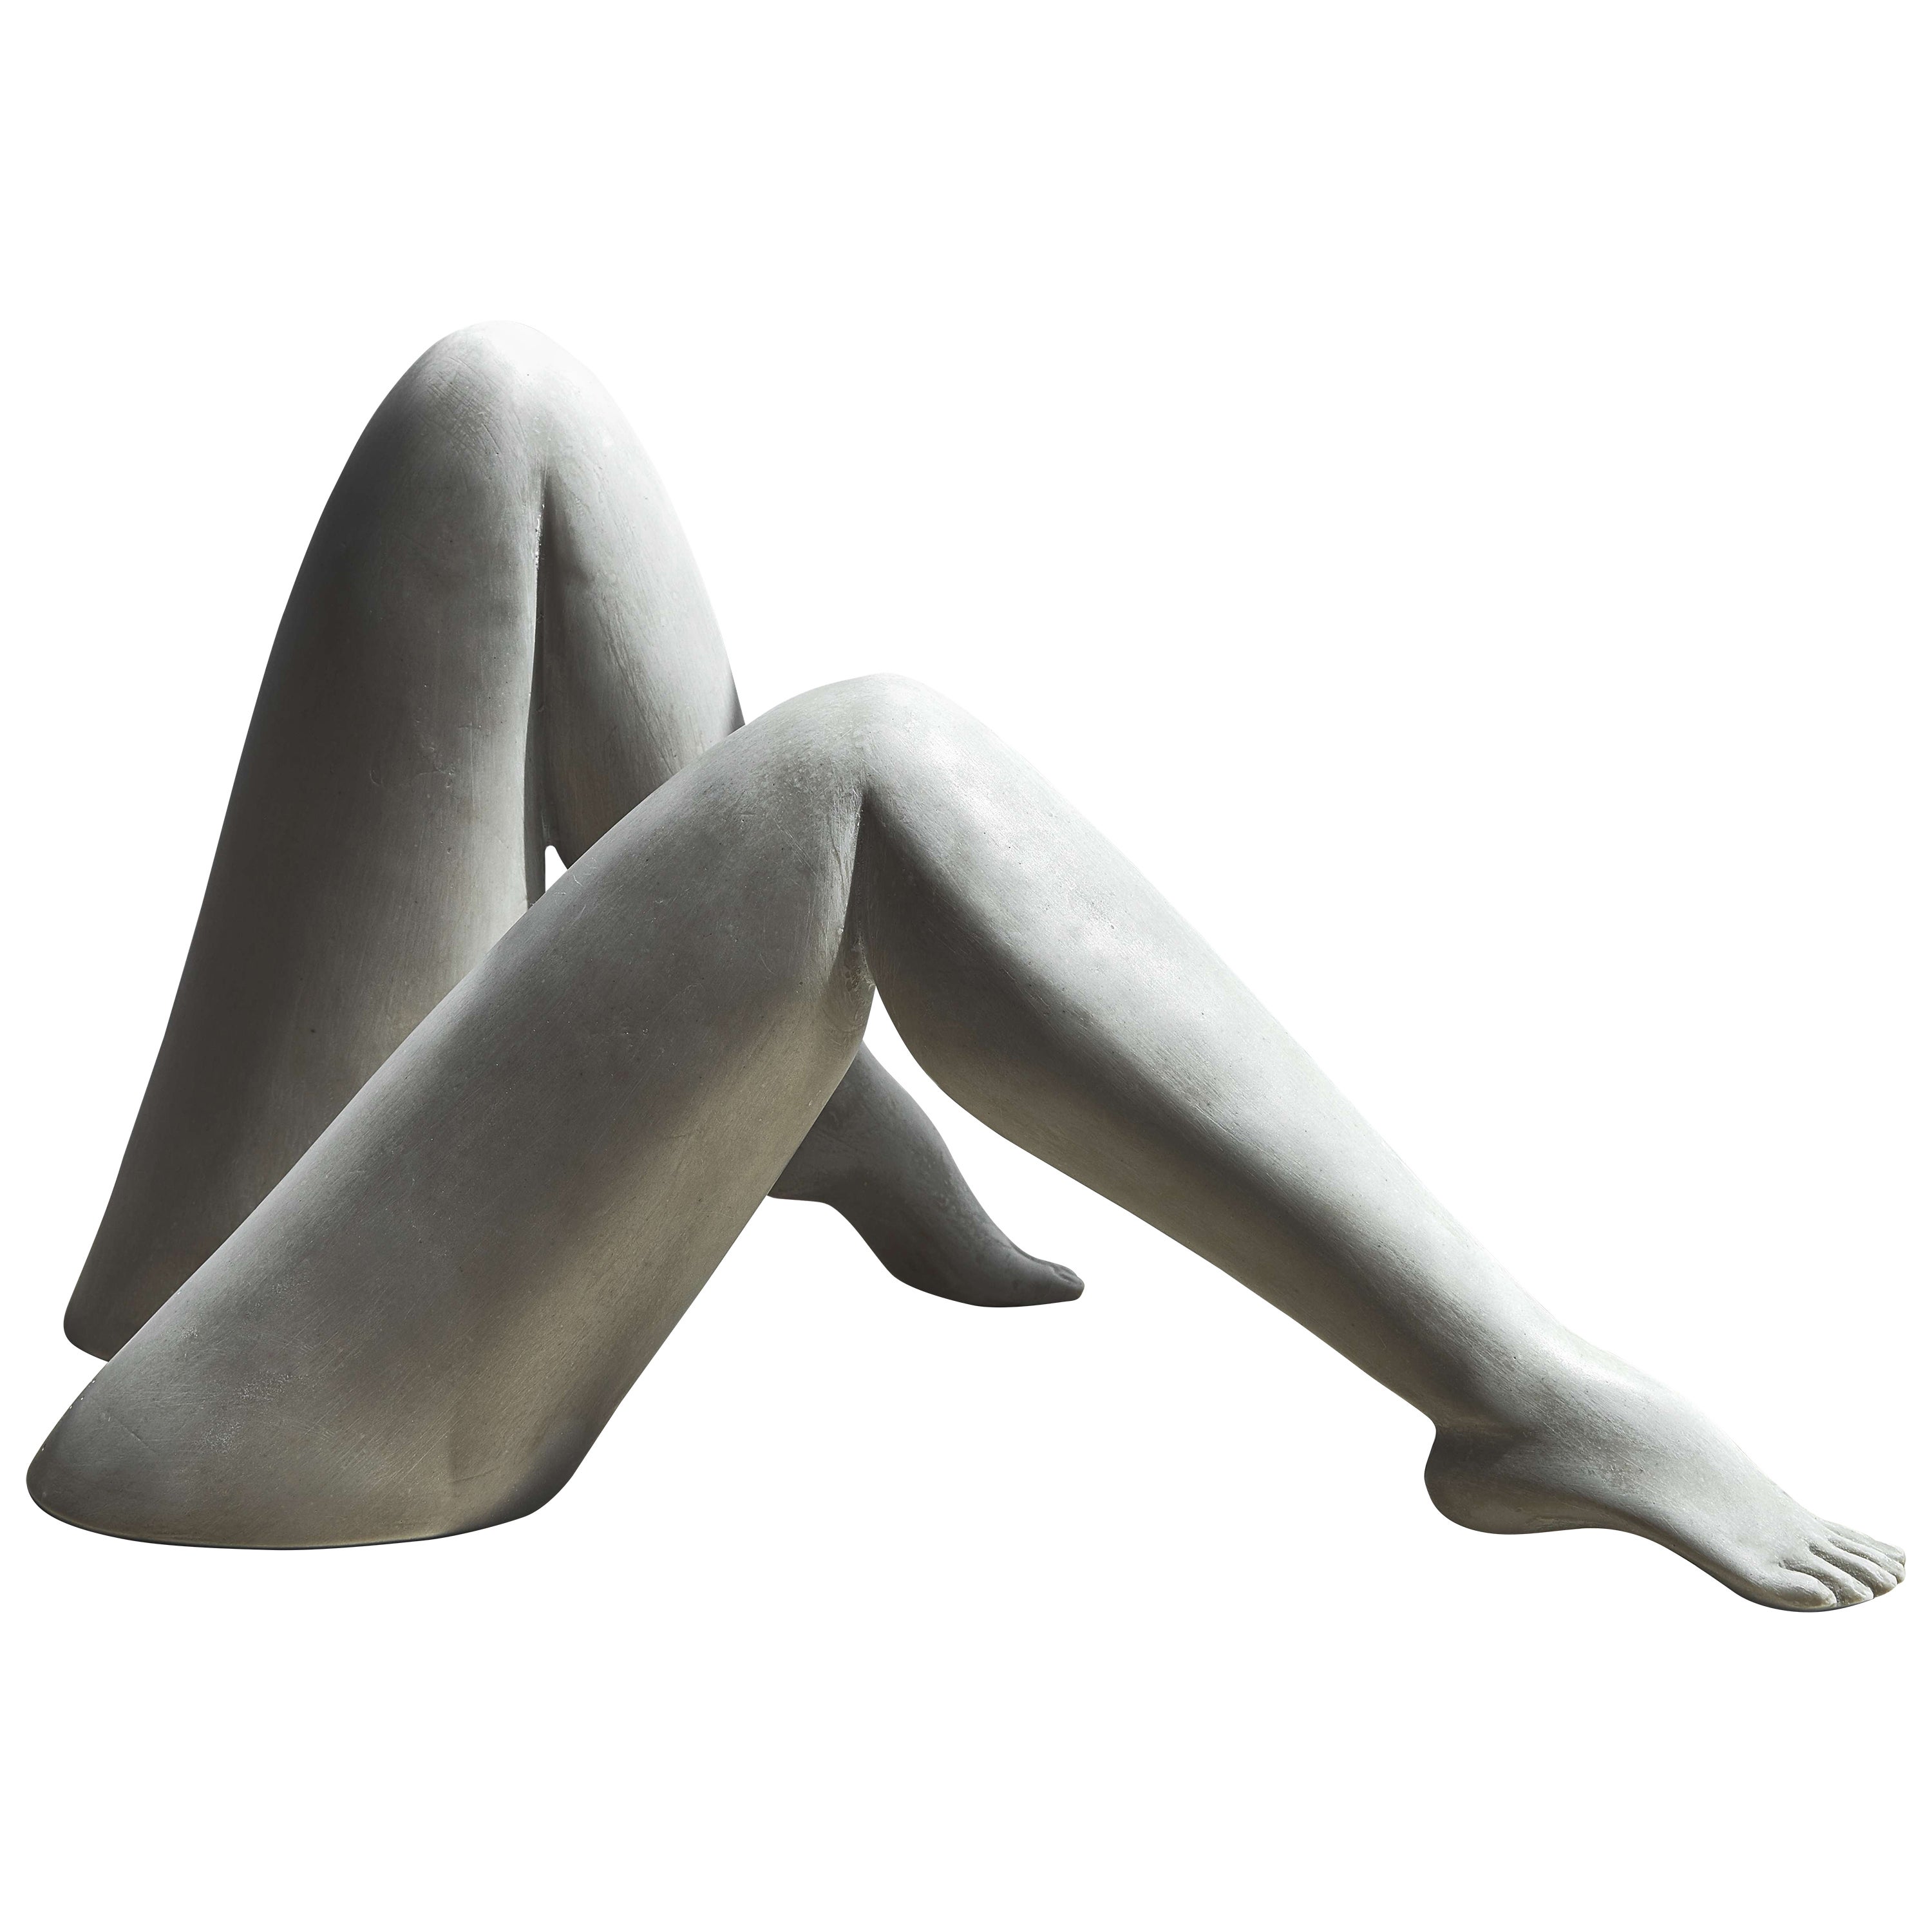 Marcela Cure Le Gambe Hand-Crafted Resin and Stone Leg Sculpture  For Sale